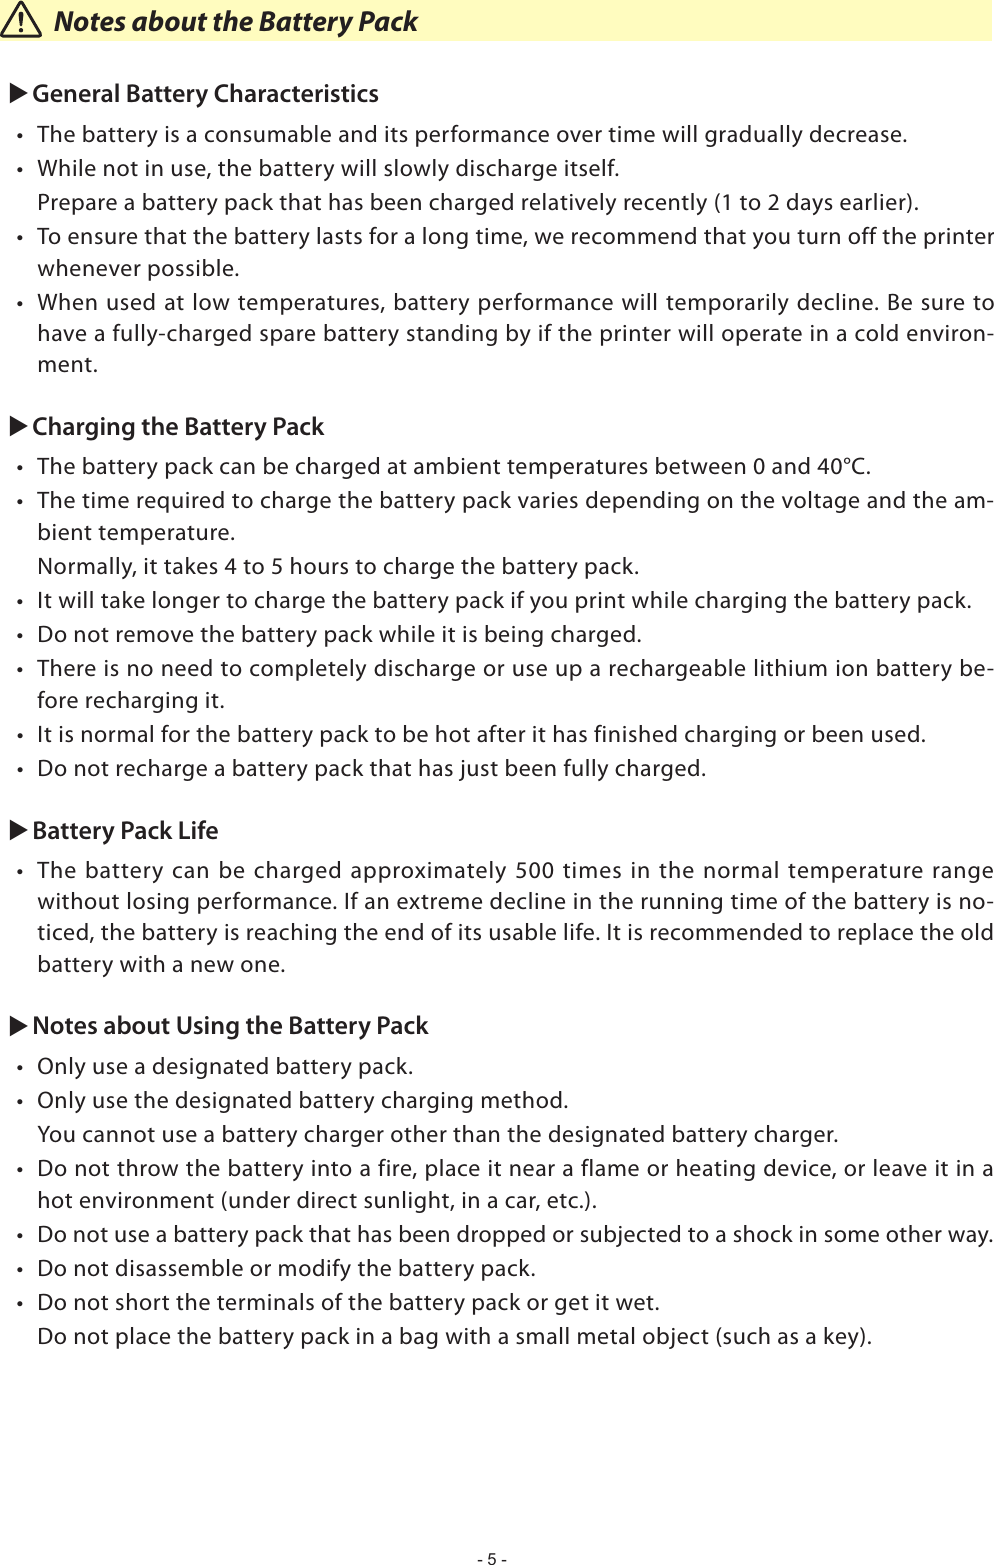 - 5 -      Notes about the Battery PackuGeneral Battery Characteristics The battery is a consumable and its performance over time will gradually decrease.   While not in use, the battery will slowly discharge itself.   Prepare a battery pack that has been charged relatively recently (1 to 2 days earlier). To ensure that the battery lasts for a long time, we recommend that you turn off the printer whenever possible. When used at low temperatures, battery performance will temporarily decline. Be sure to have a fully-charged spare battery standing by if the printer will operate in a cold environ-ment.uCharging the Battery Pack  -bient temperature.  Normally, it takes 4 to 5 hours to charge the battery pack.   -fore recharging it.  uBattery Pack Life without losing performance. If an extreme decline in the running time of the battery is no-ticed, the battery is reaching the end of its usable life. It is recommended to replace the old battery with a new one.uNotes about Using the Battery Pack    hot environment (under direct sunlight, in a car, etc.).     Do not place the battery pack in a bag with a small metal object (such as a key).